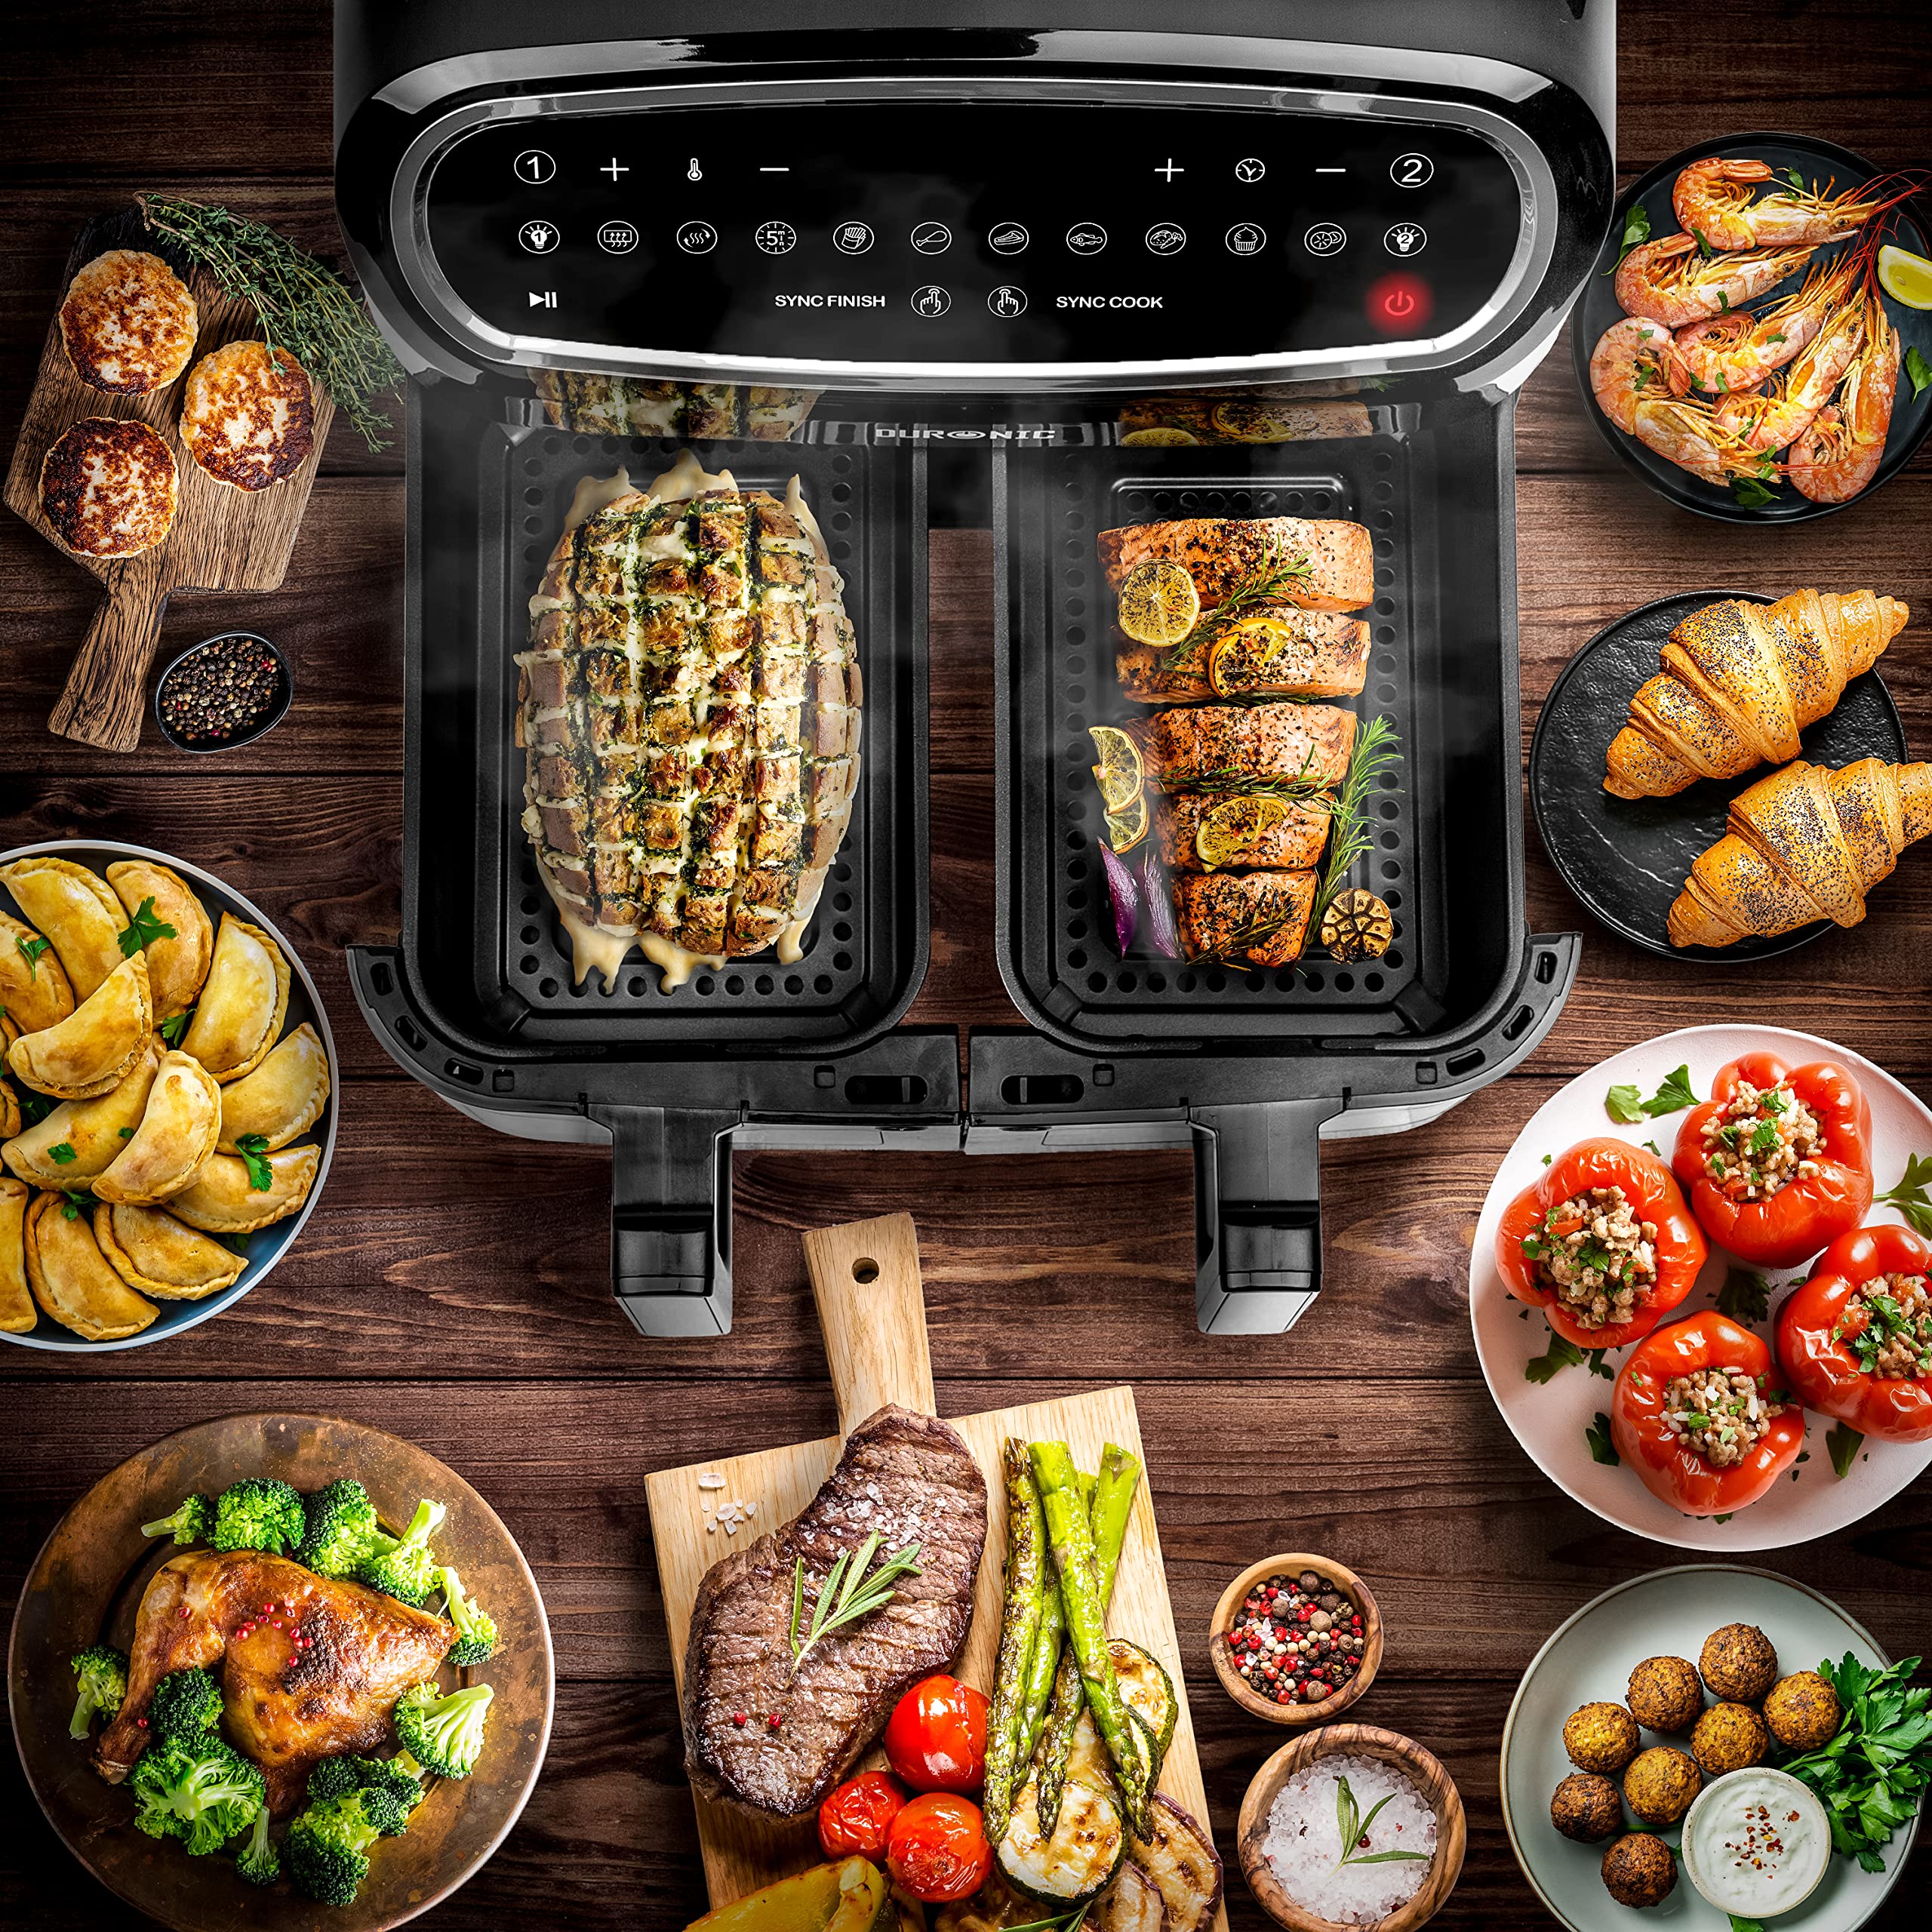 Duronic Air Fryer AF34, 2-in-1 Air Fryer Set with 1 x 10L Large Drawer and 2 x.5L Twin Drawers, No Oil Dual Zone Family Sized Cooker, Touch Screen Smart Finish Timer Function